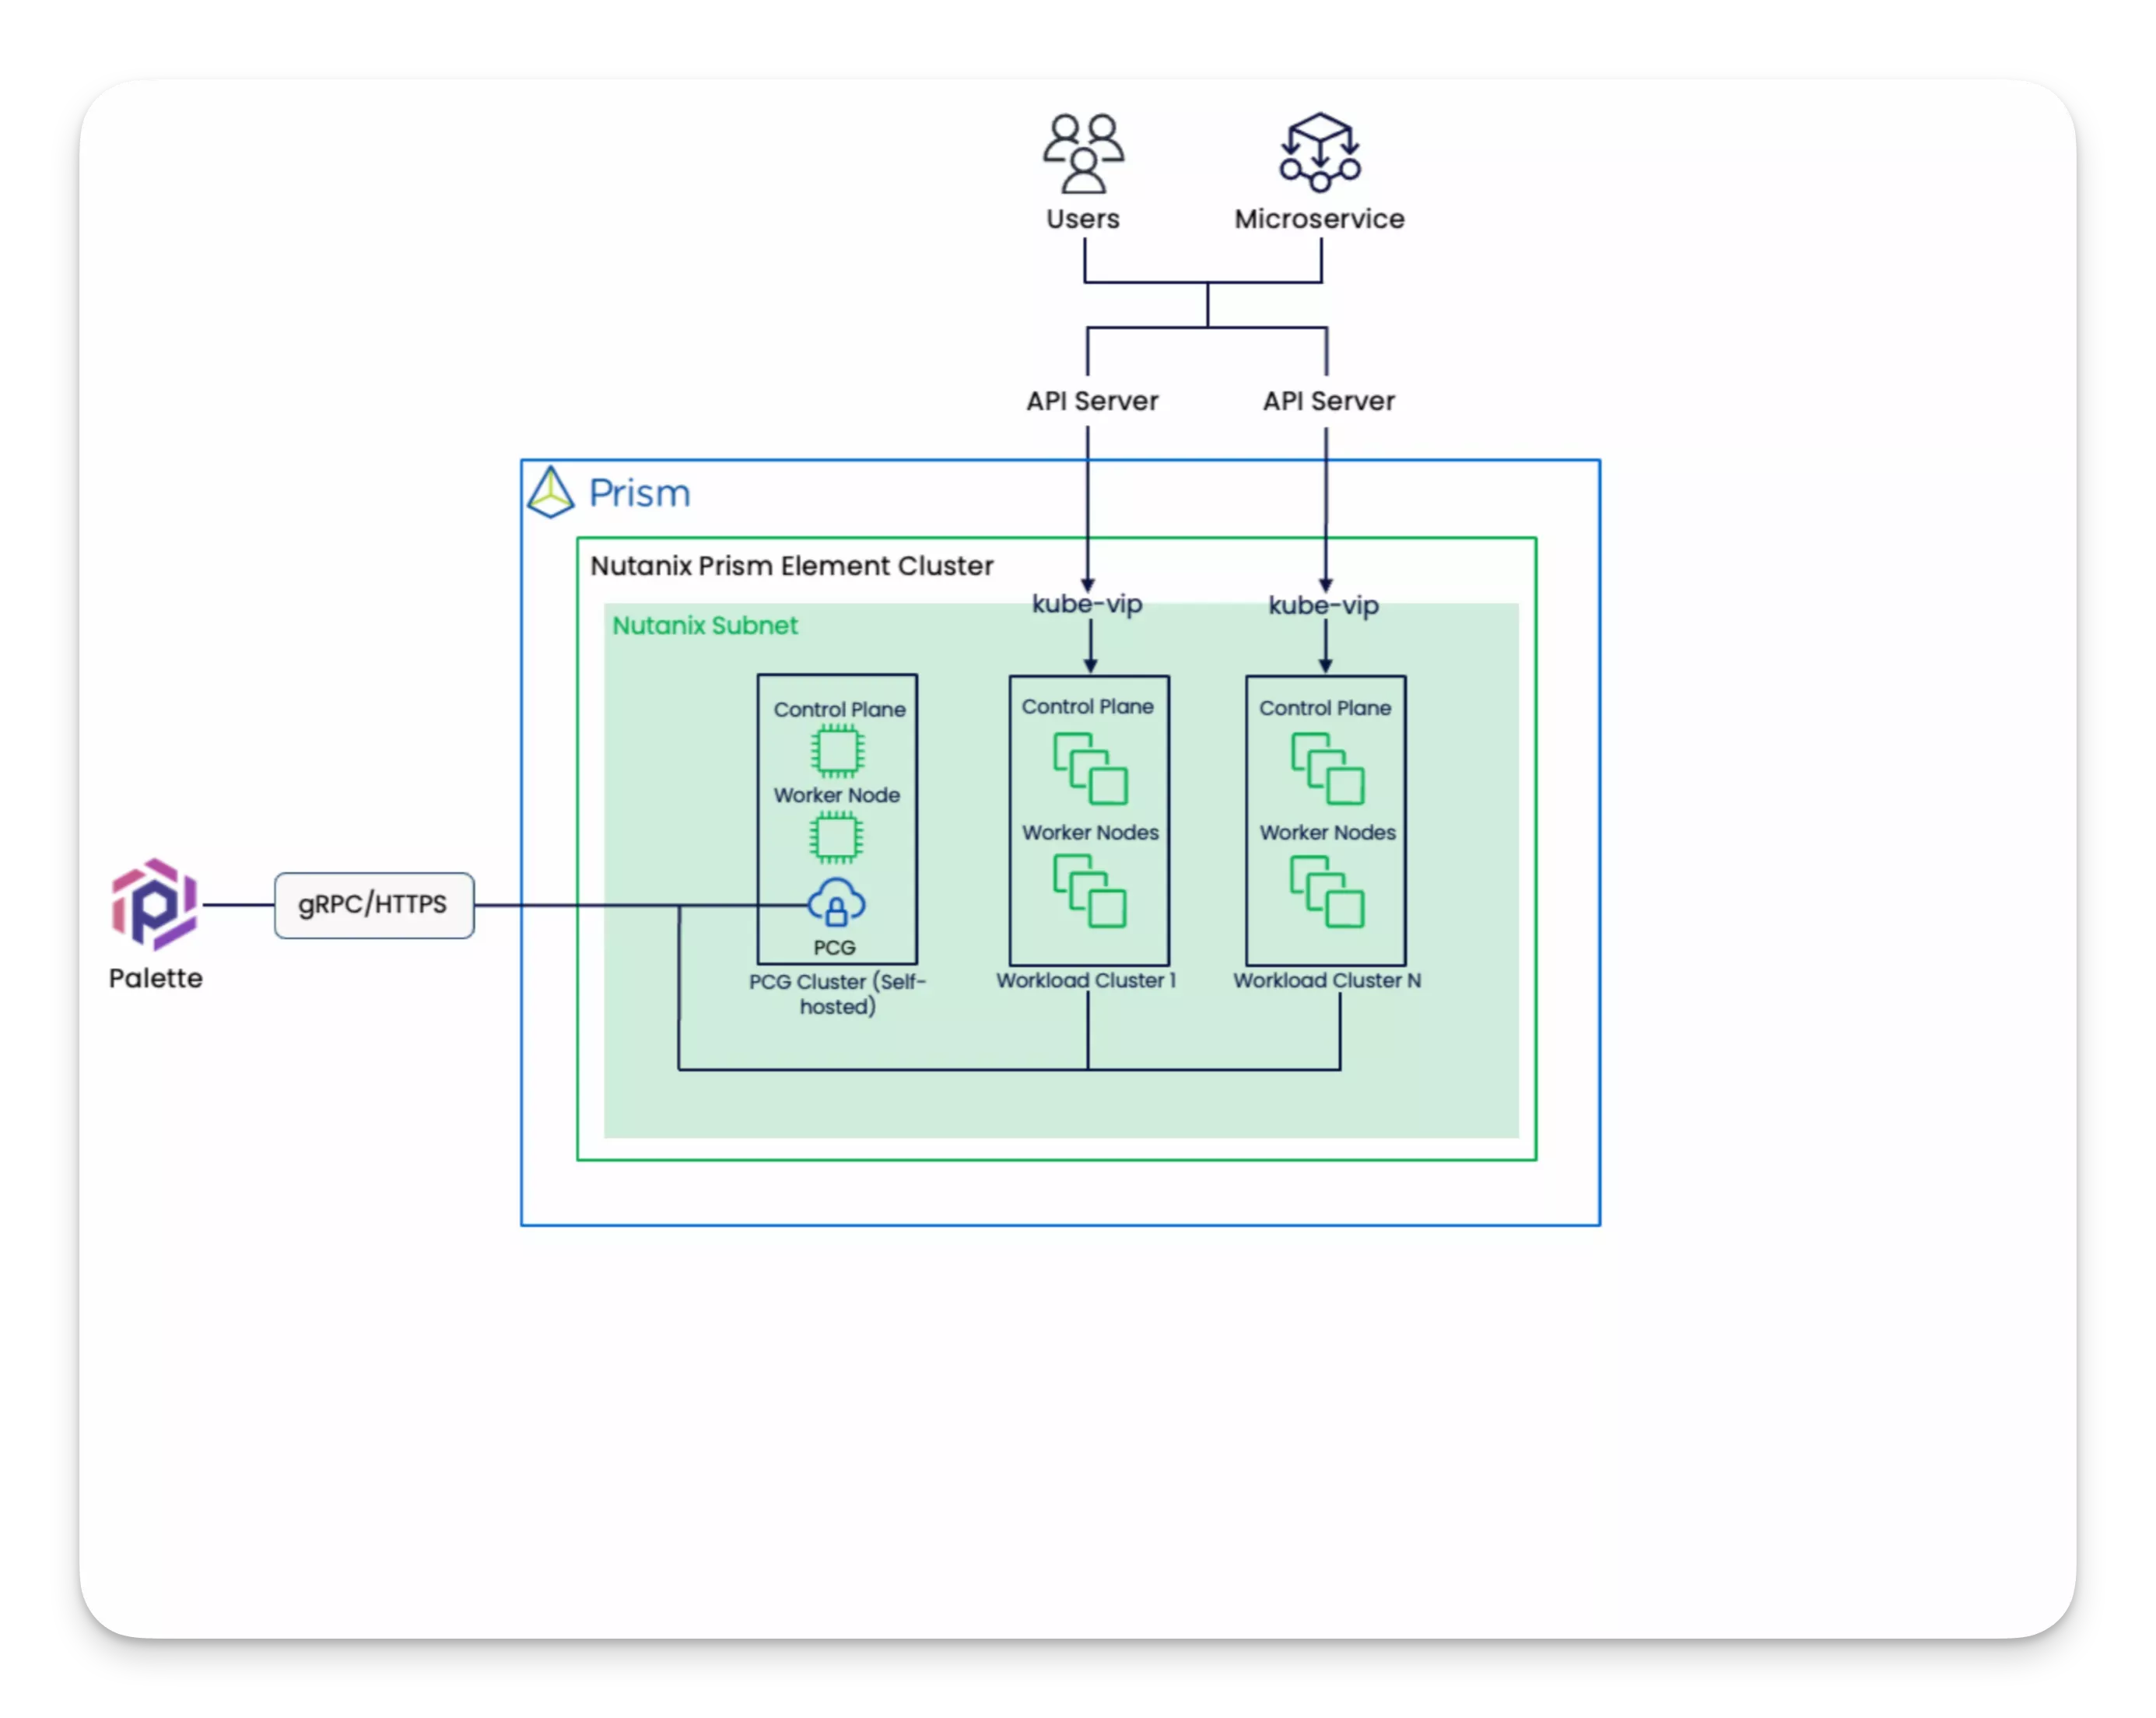 Network flow from an architectural perspective of how Nutanix works with Palette.